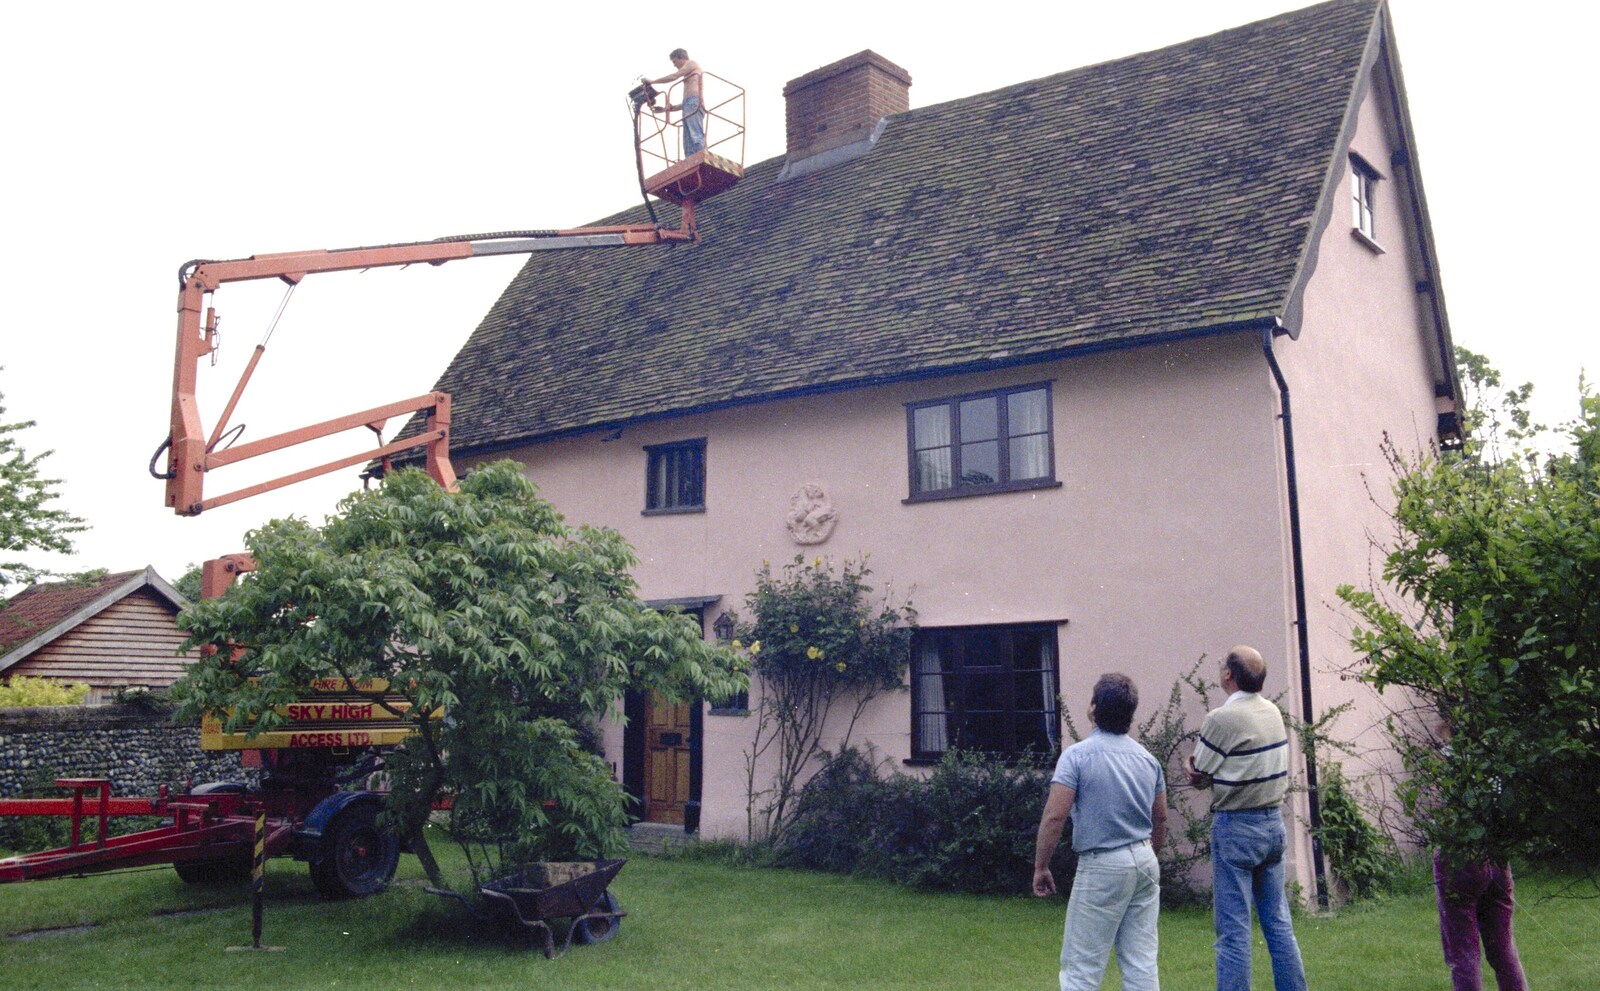 Geoff gets up to his chimney from The Election Caravan and a View from a Cherry Picker, Stuston, Suffolk - 9th April 1992